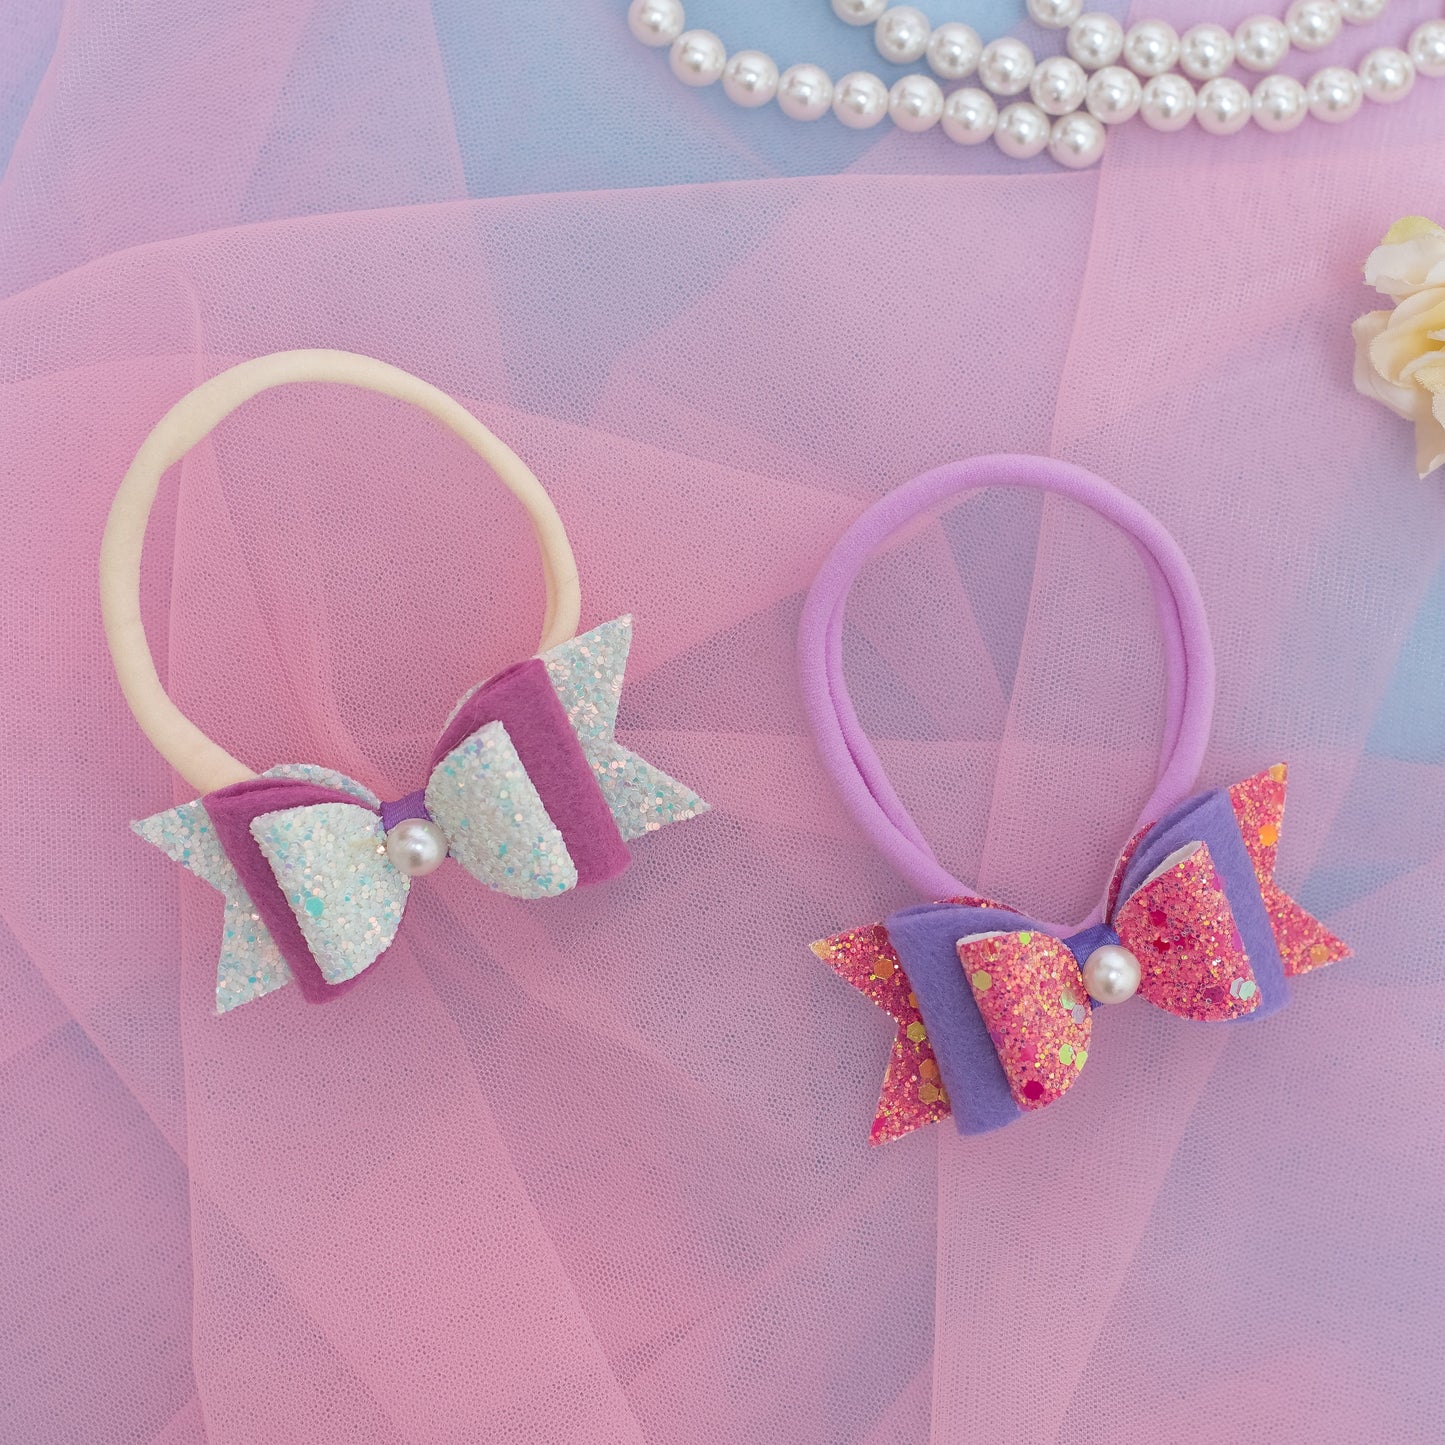 Combo: 2 Super Soft Infant Stretchy Bands with Glitter Bows on each - Pink, Aqua (Set of 2 Stretchy Bands)